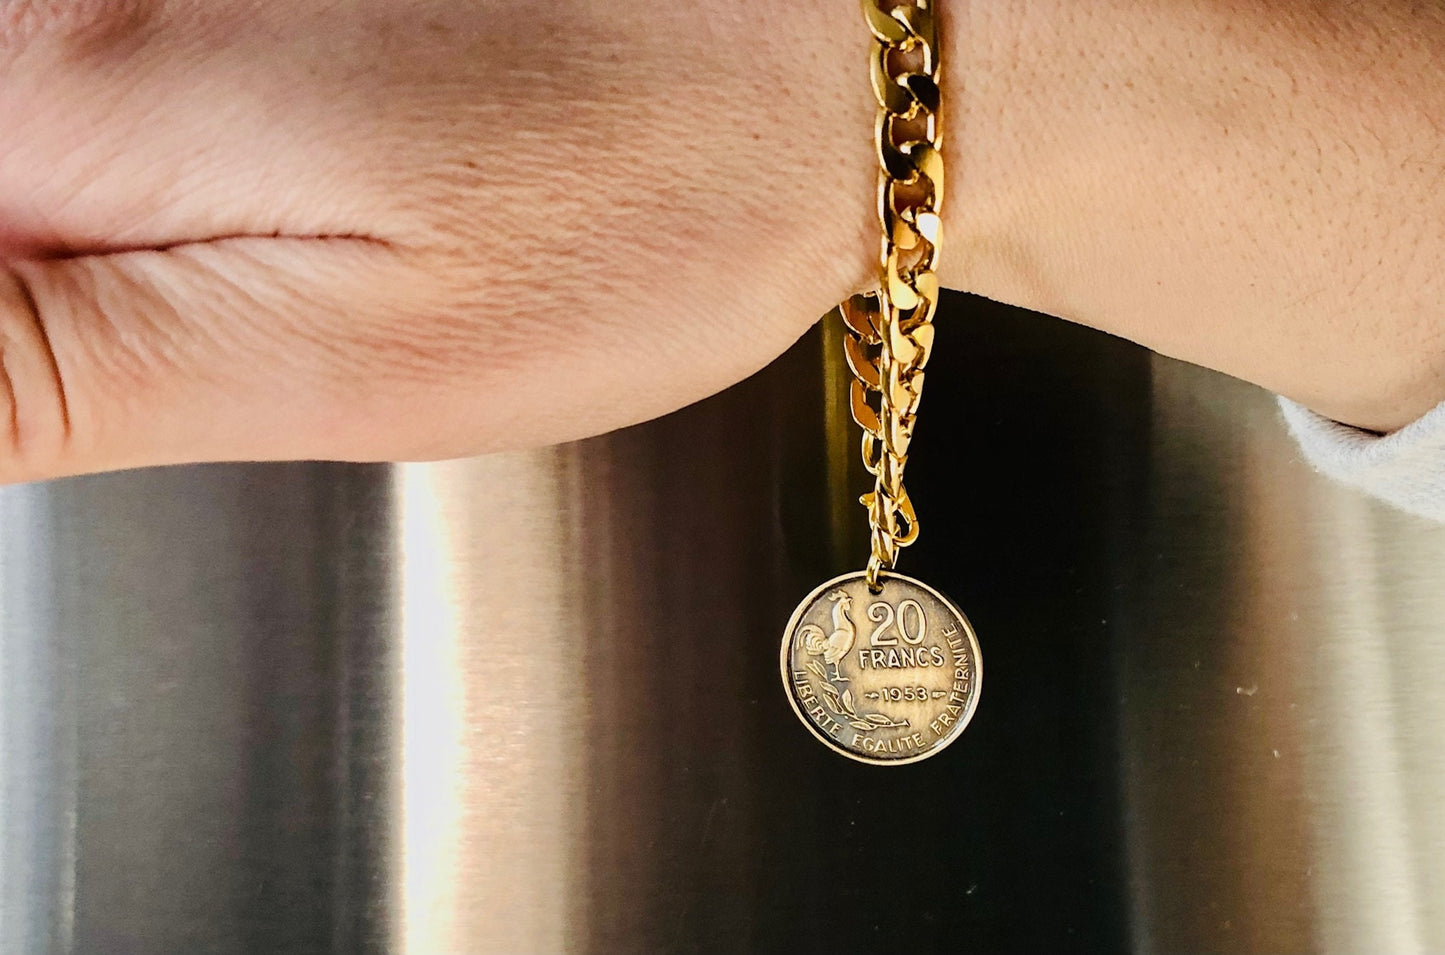 New Zealand Coin Bracelet, 2 Cents, Coin Enthusiast, Rare Find, Custom Made, Fashion Accessory, Handmade